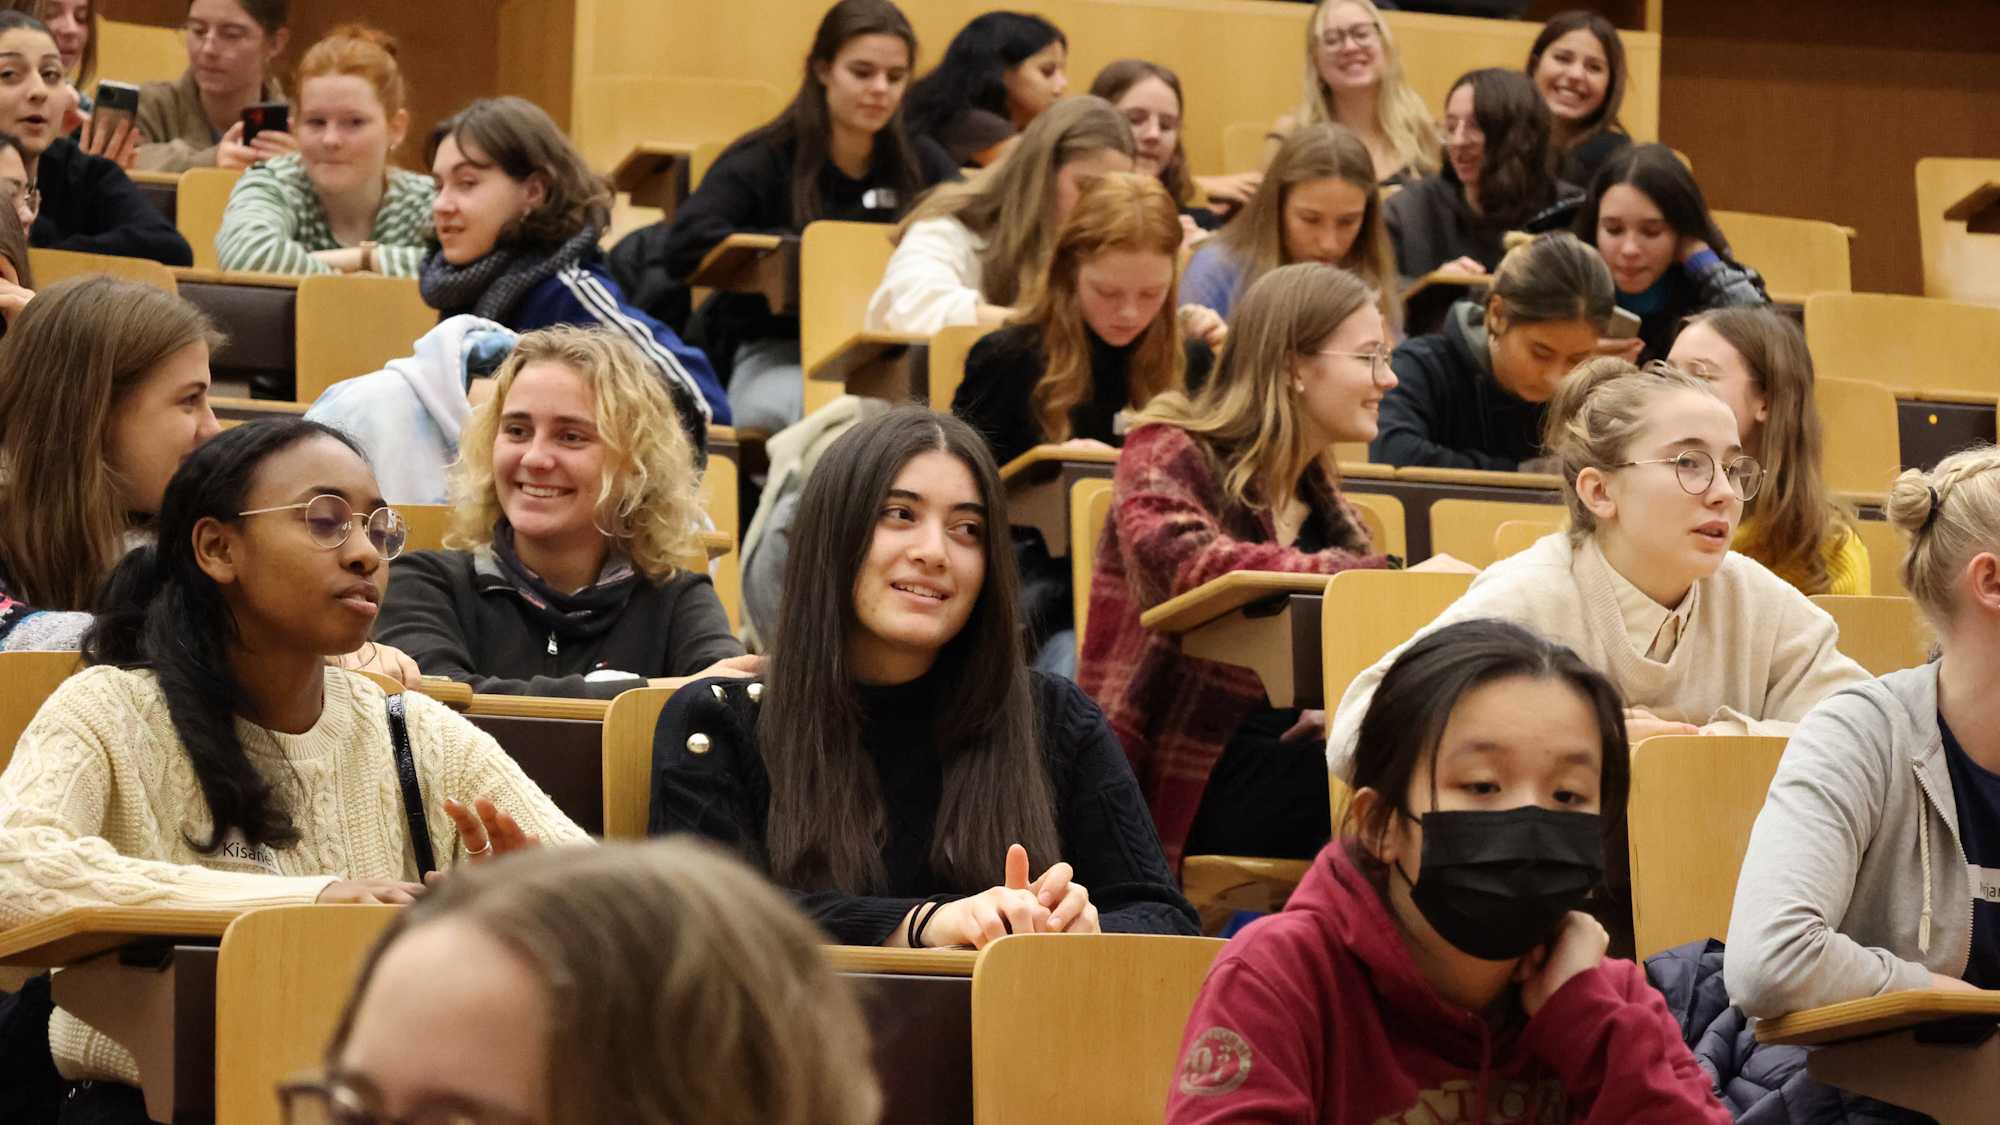 Numerous high school girls sit in the lecture hall and chat